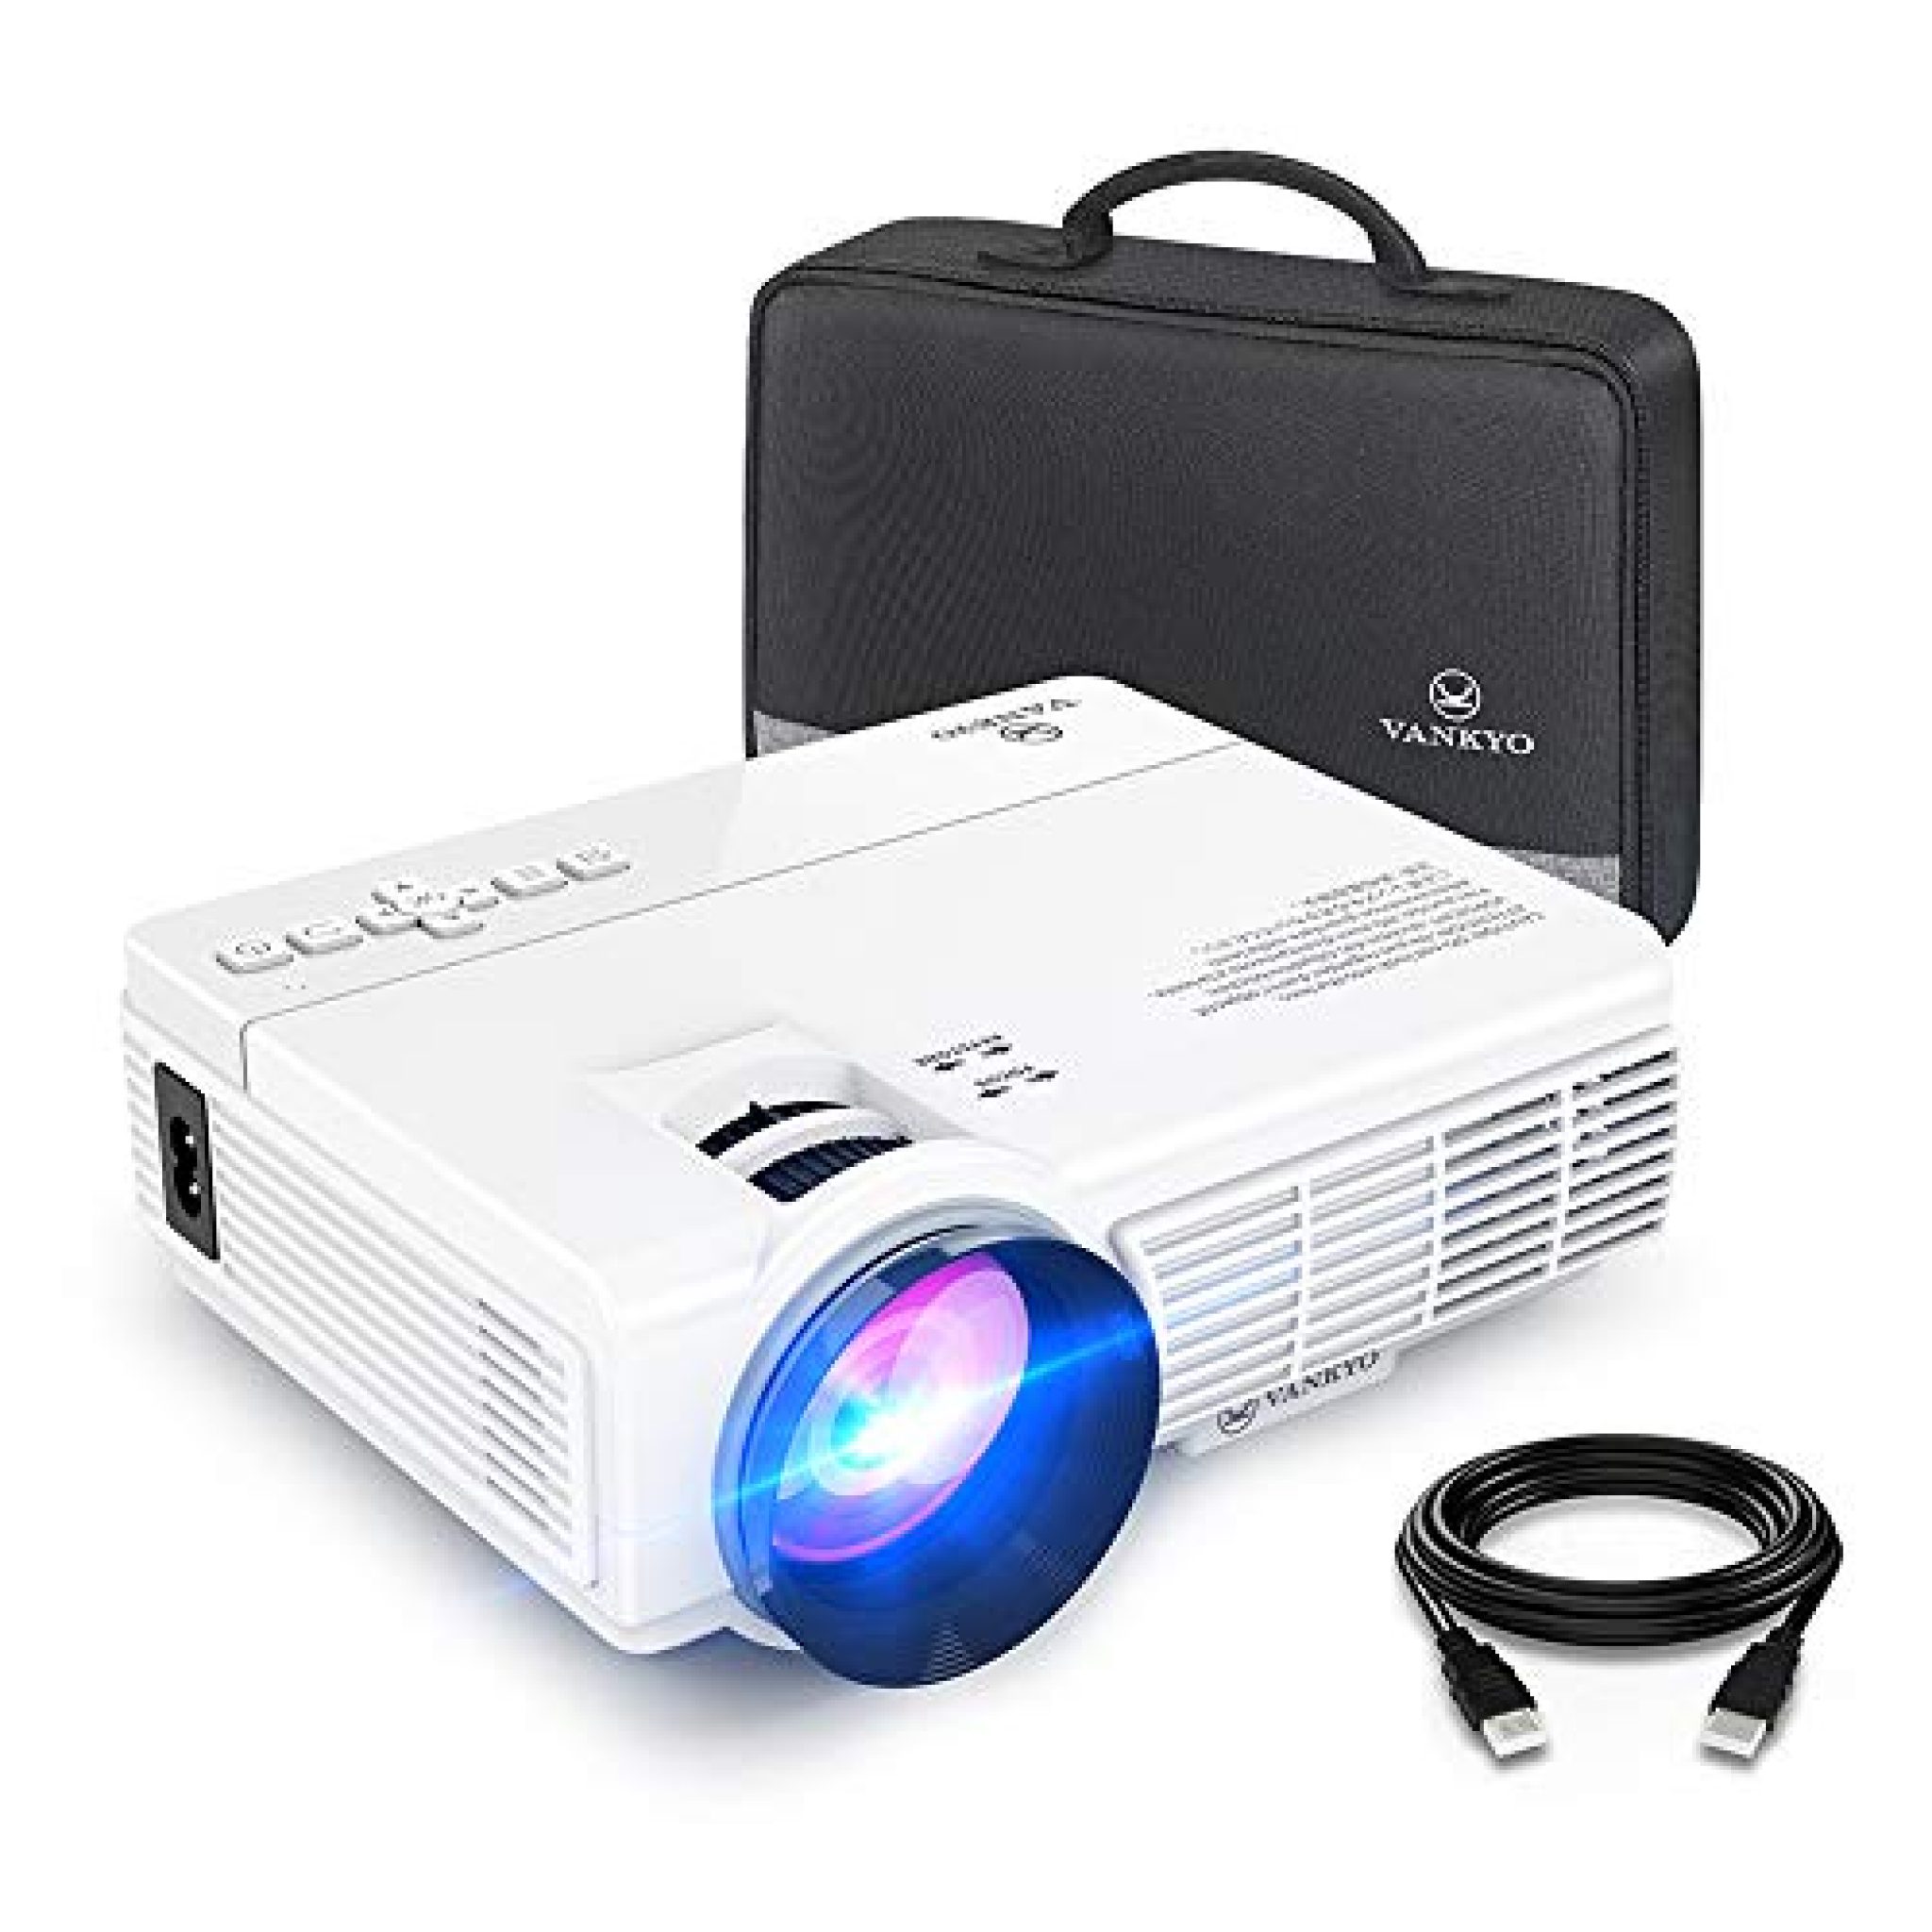 VANKYO LEISURE 3 Mini Projector, 1080P and 170'' Display Supported